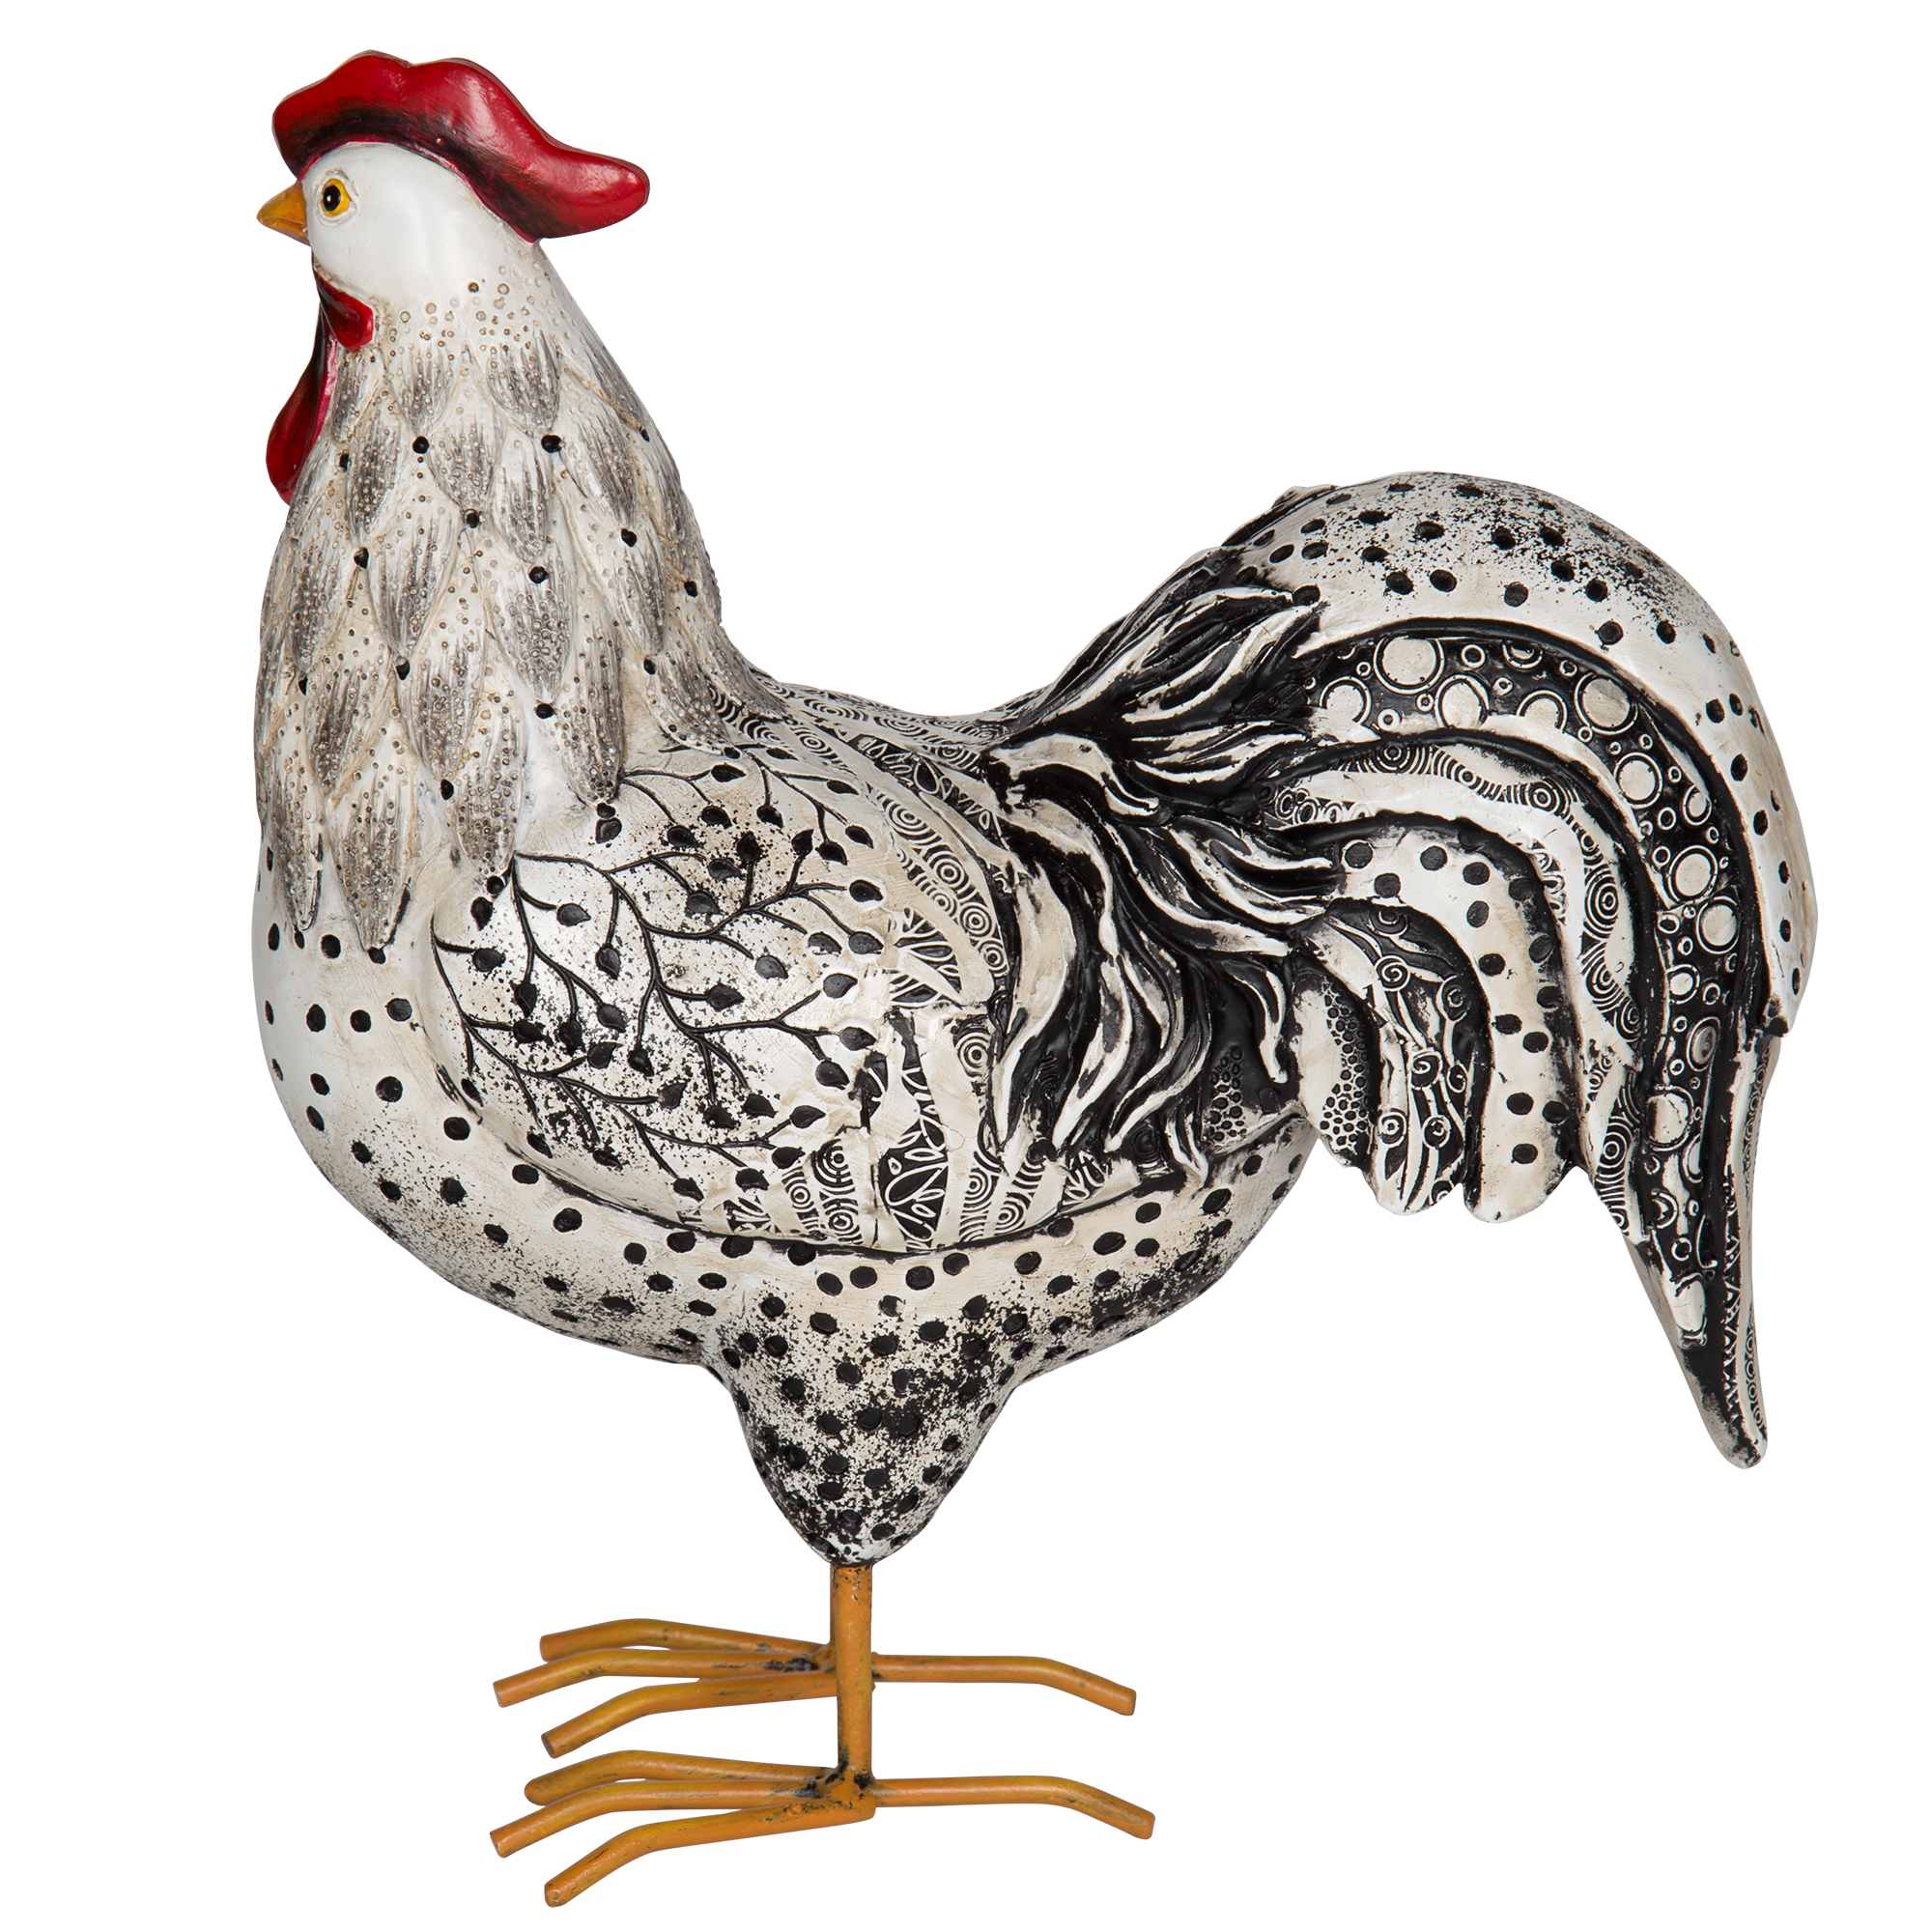 Better Homes & Gardens 9" Rustic Red & Gray Farmhouse Chicken Figurine - image 4 of 5